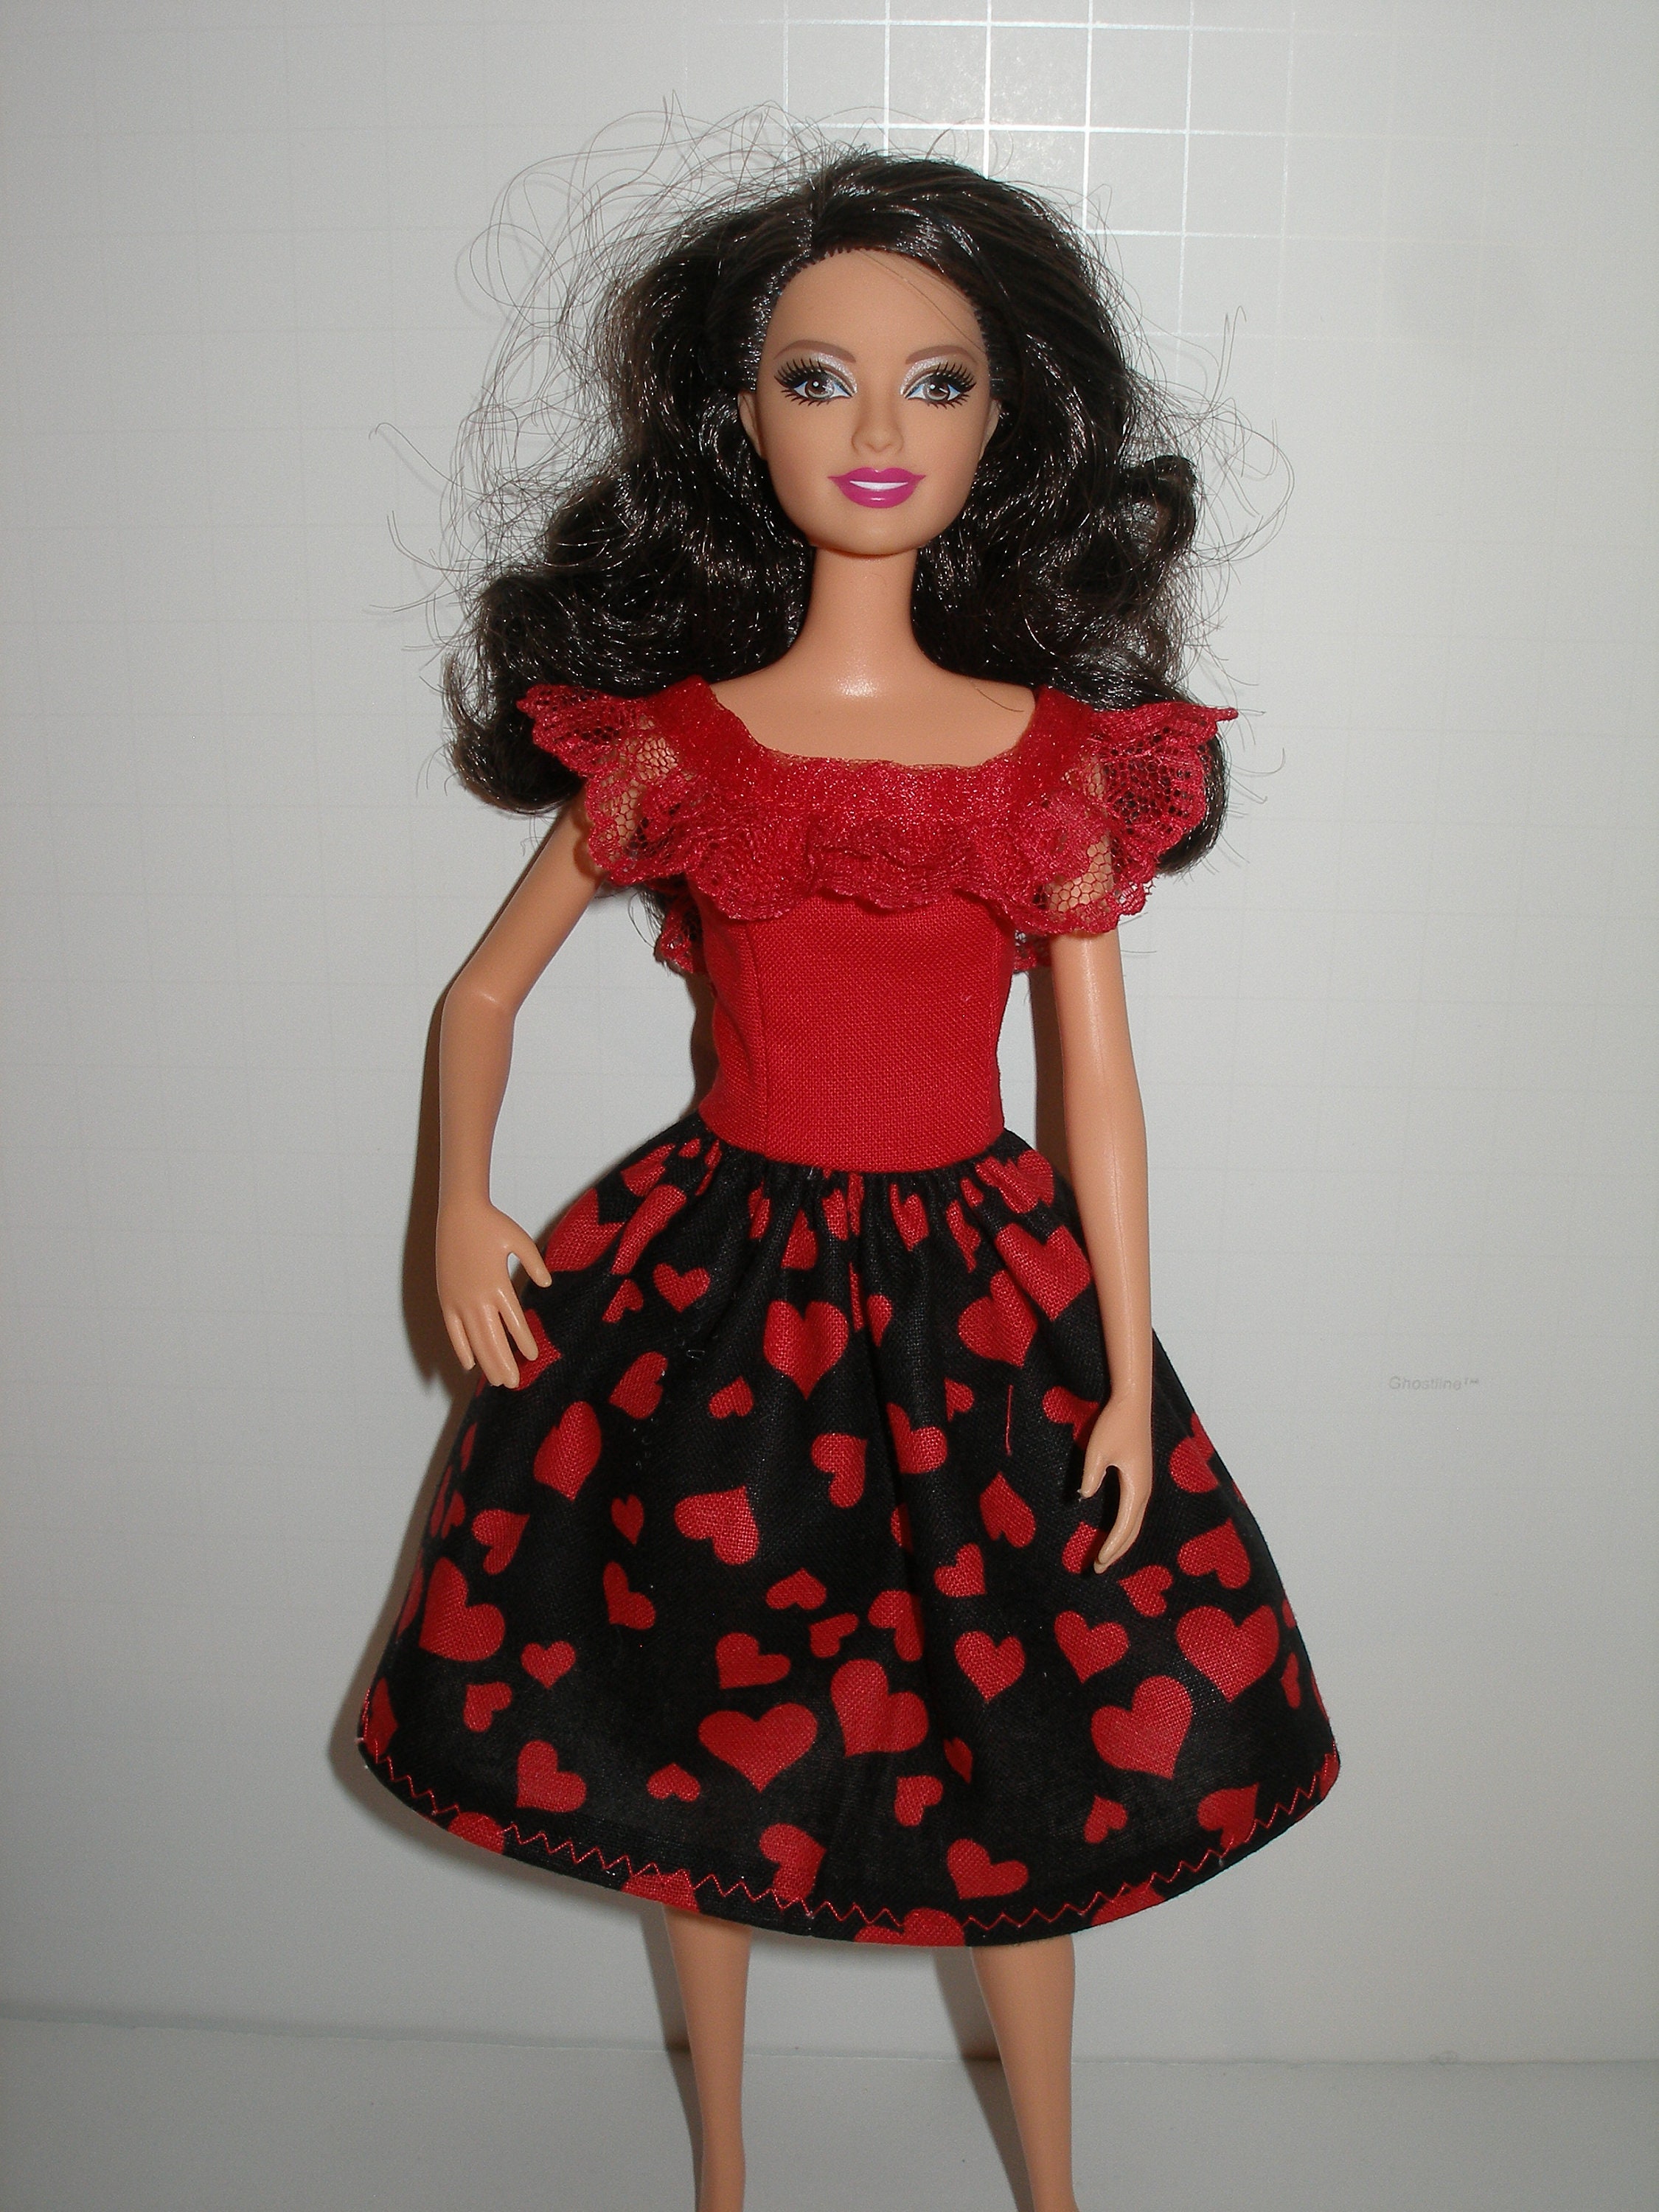 Red with colorful butterfly dress handmade to fit 11.5 inch dolls Doll sundress